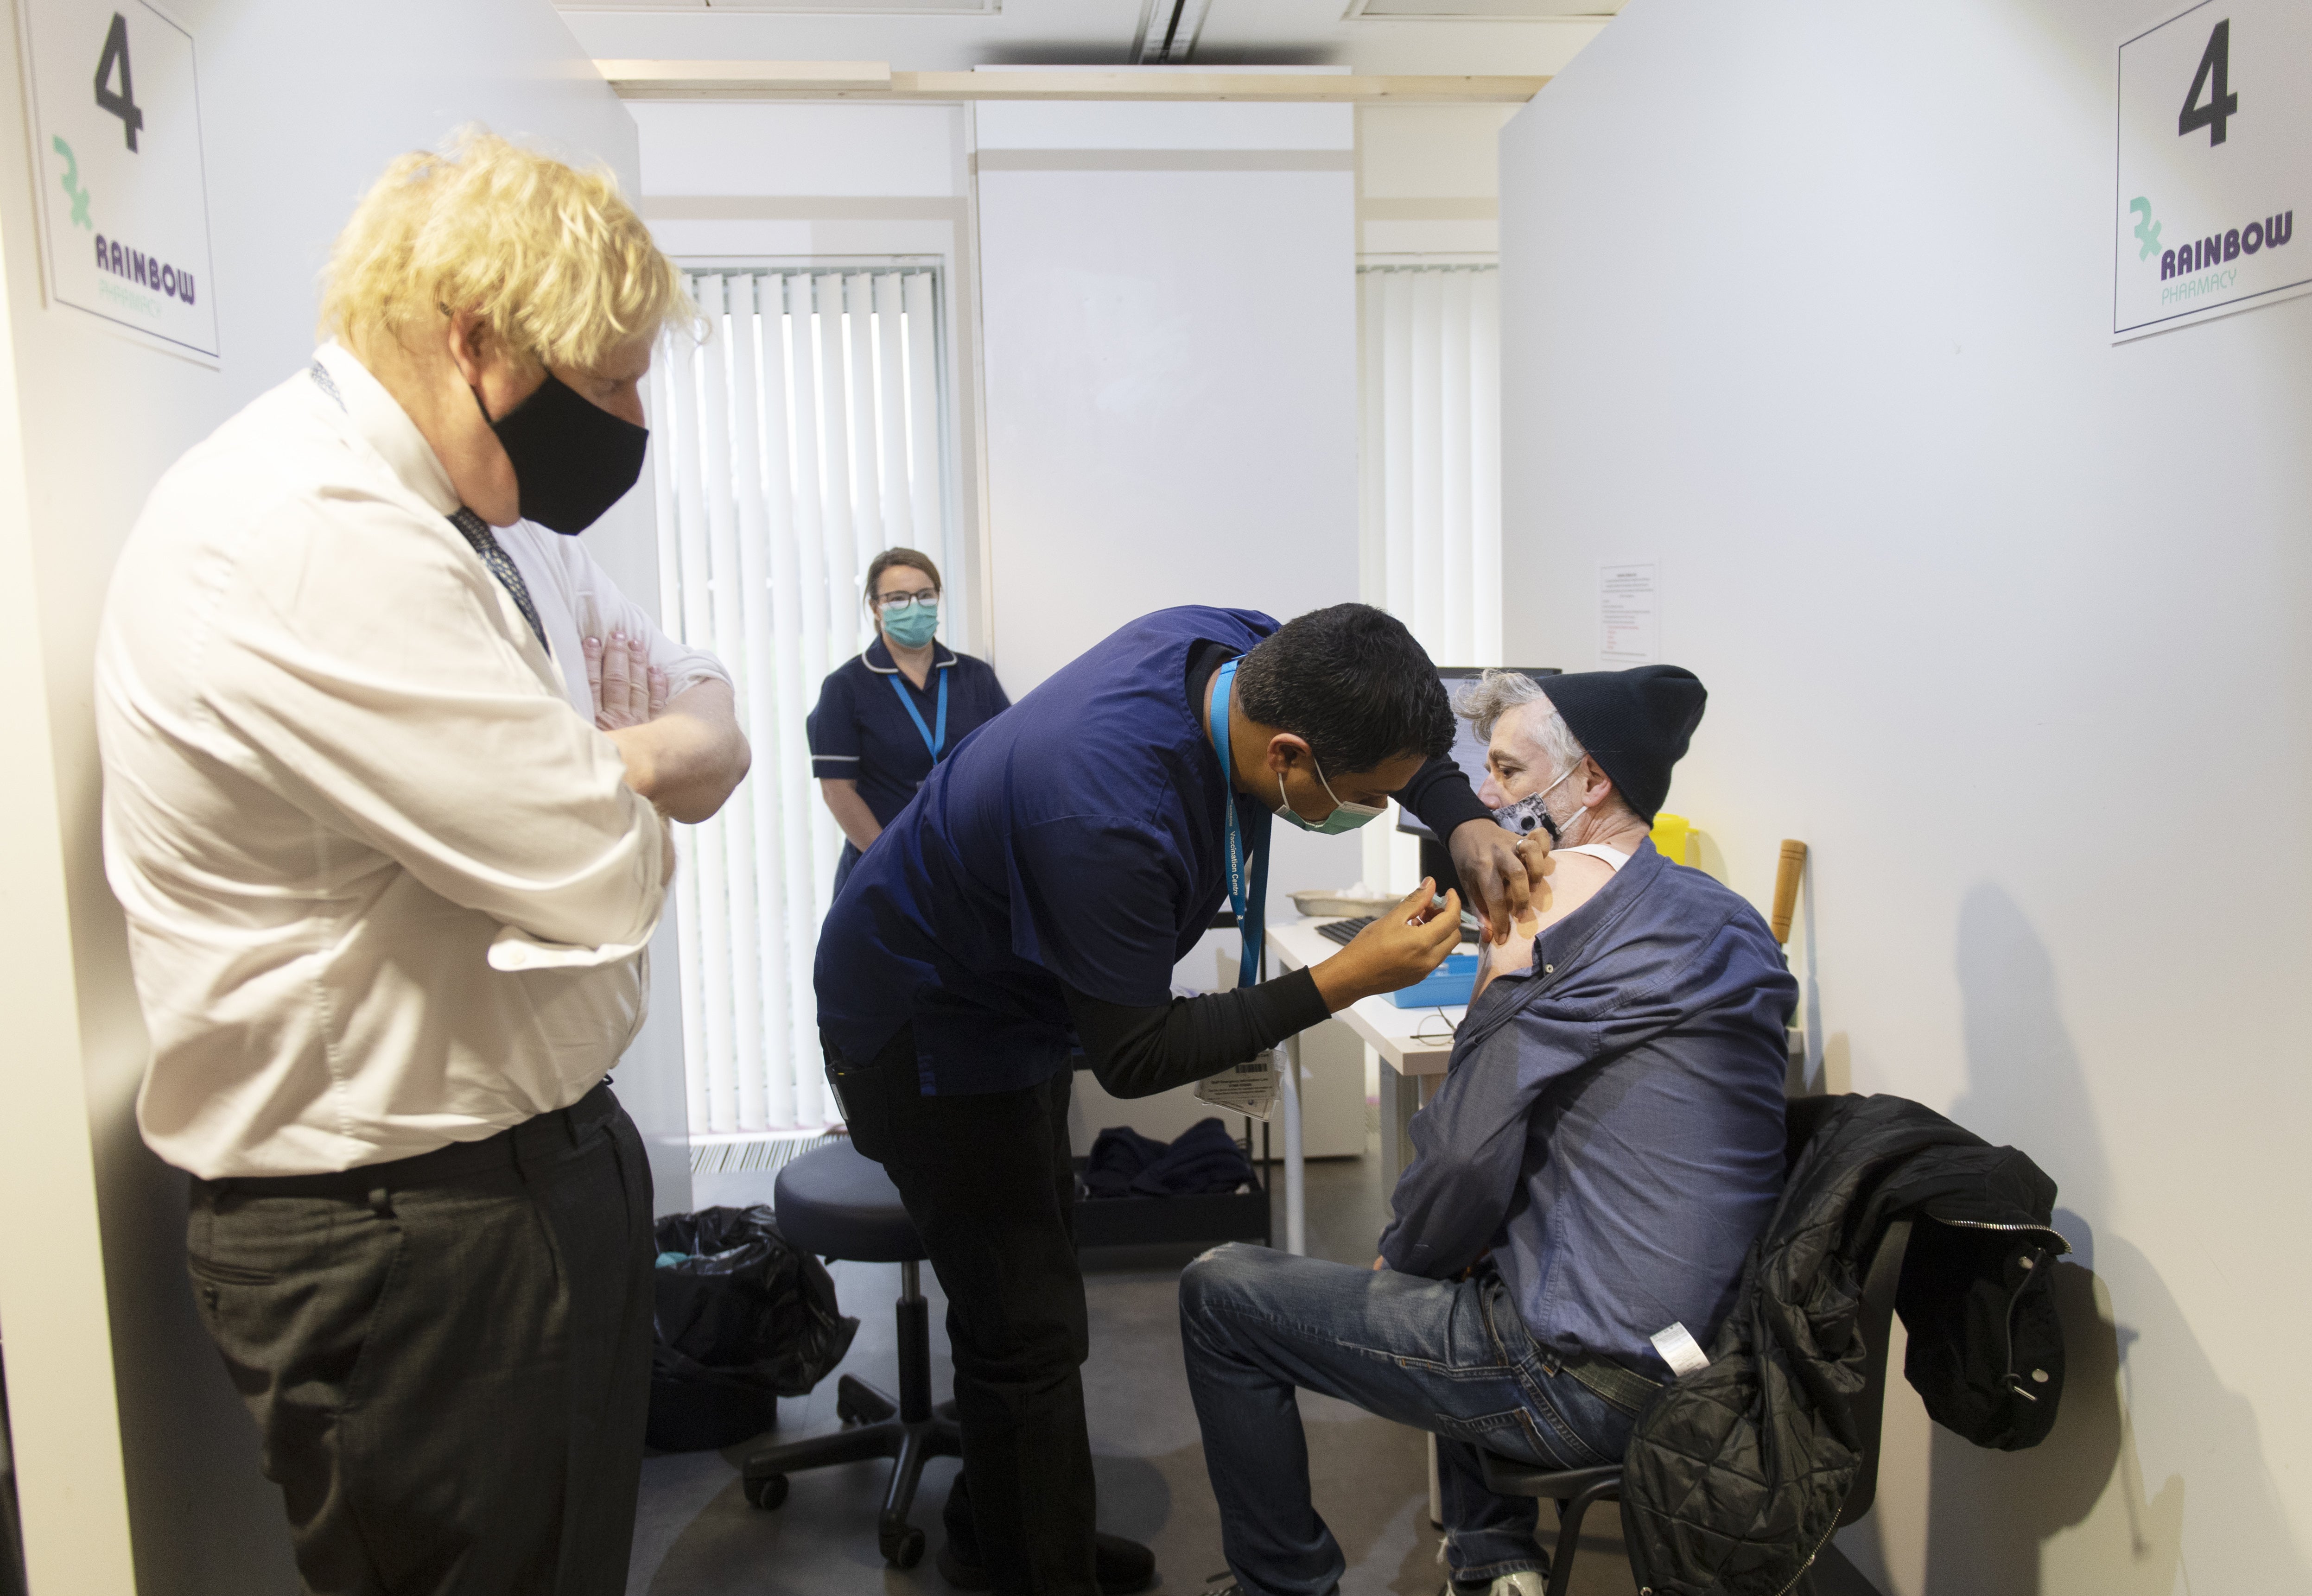 Prime Minister Boris Johnson during a visit to a Covid vaccination centre in Milton Keynes (Geoff Pugh/Daily Telegraph)